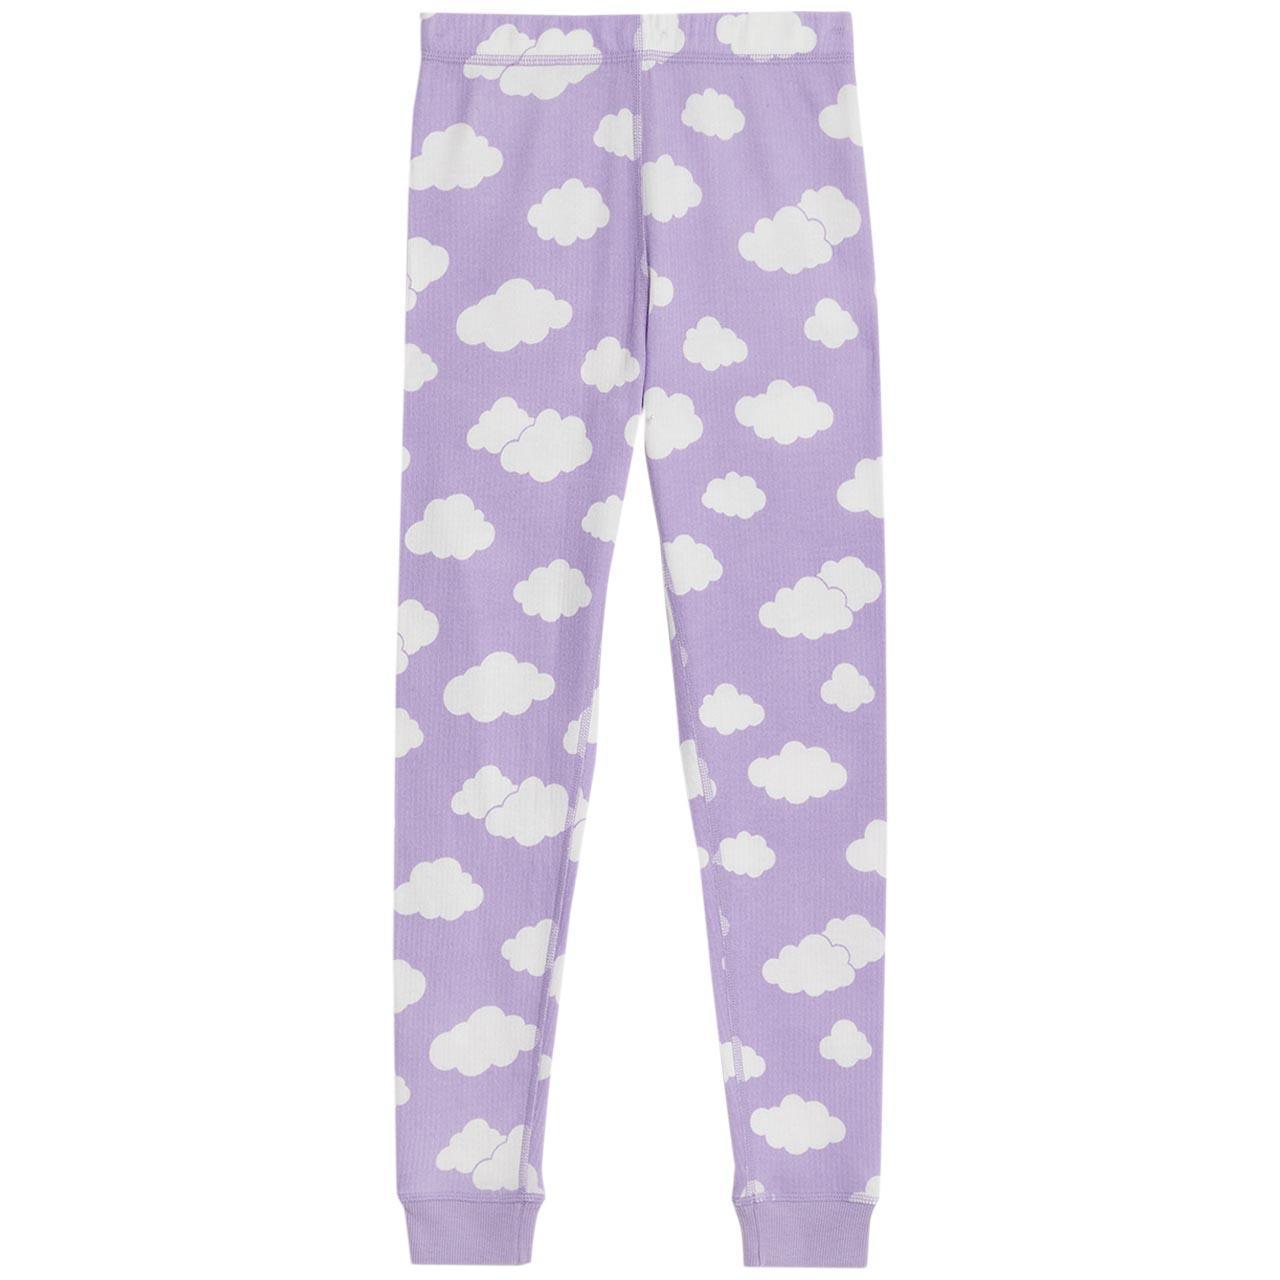 M&S Cloud Bottoms, 5-6 Years, Lilac